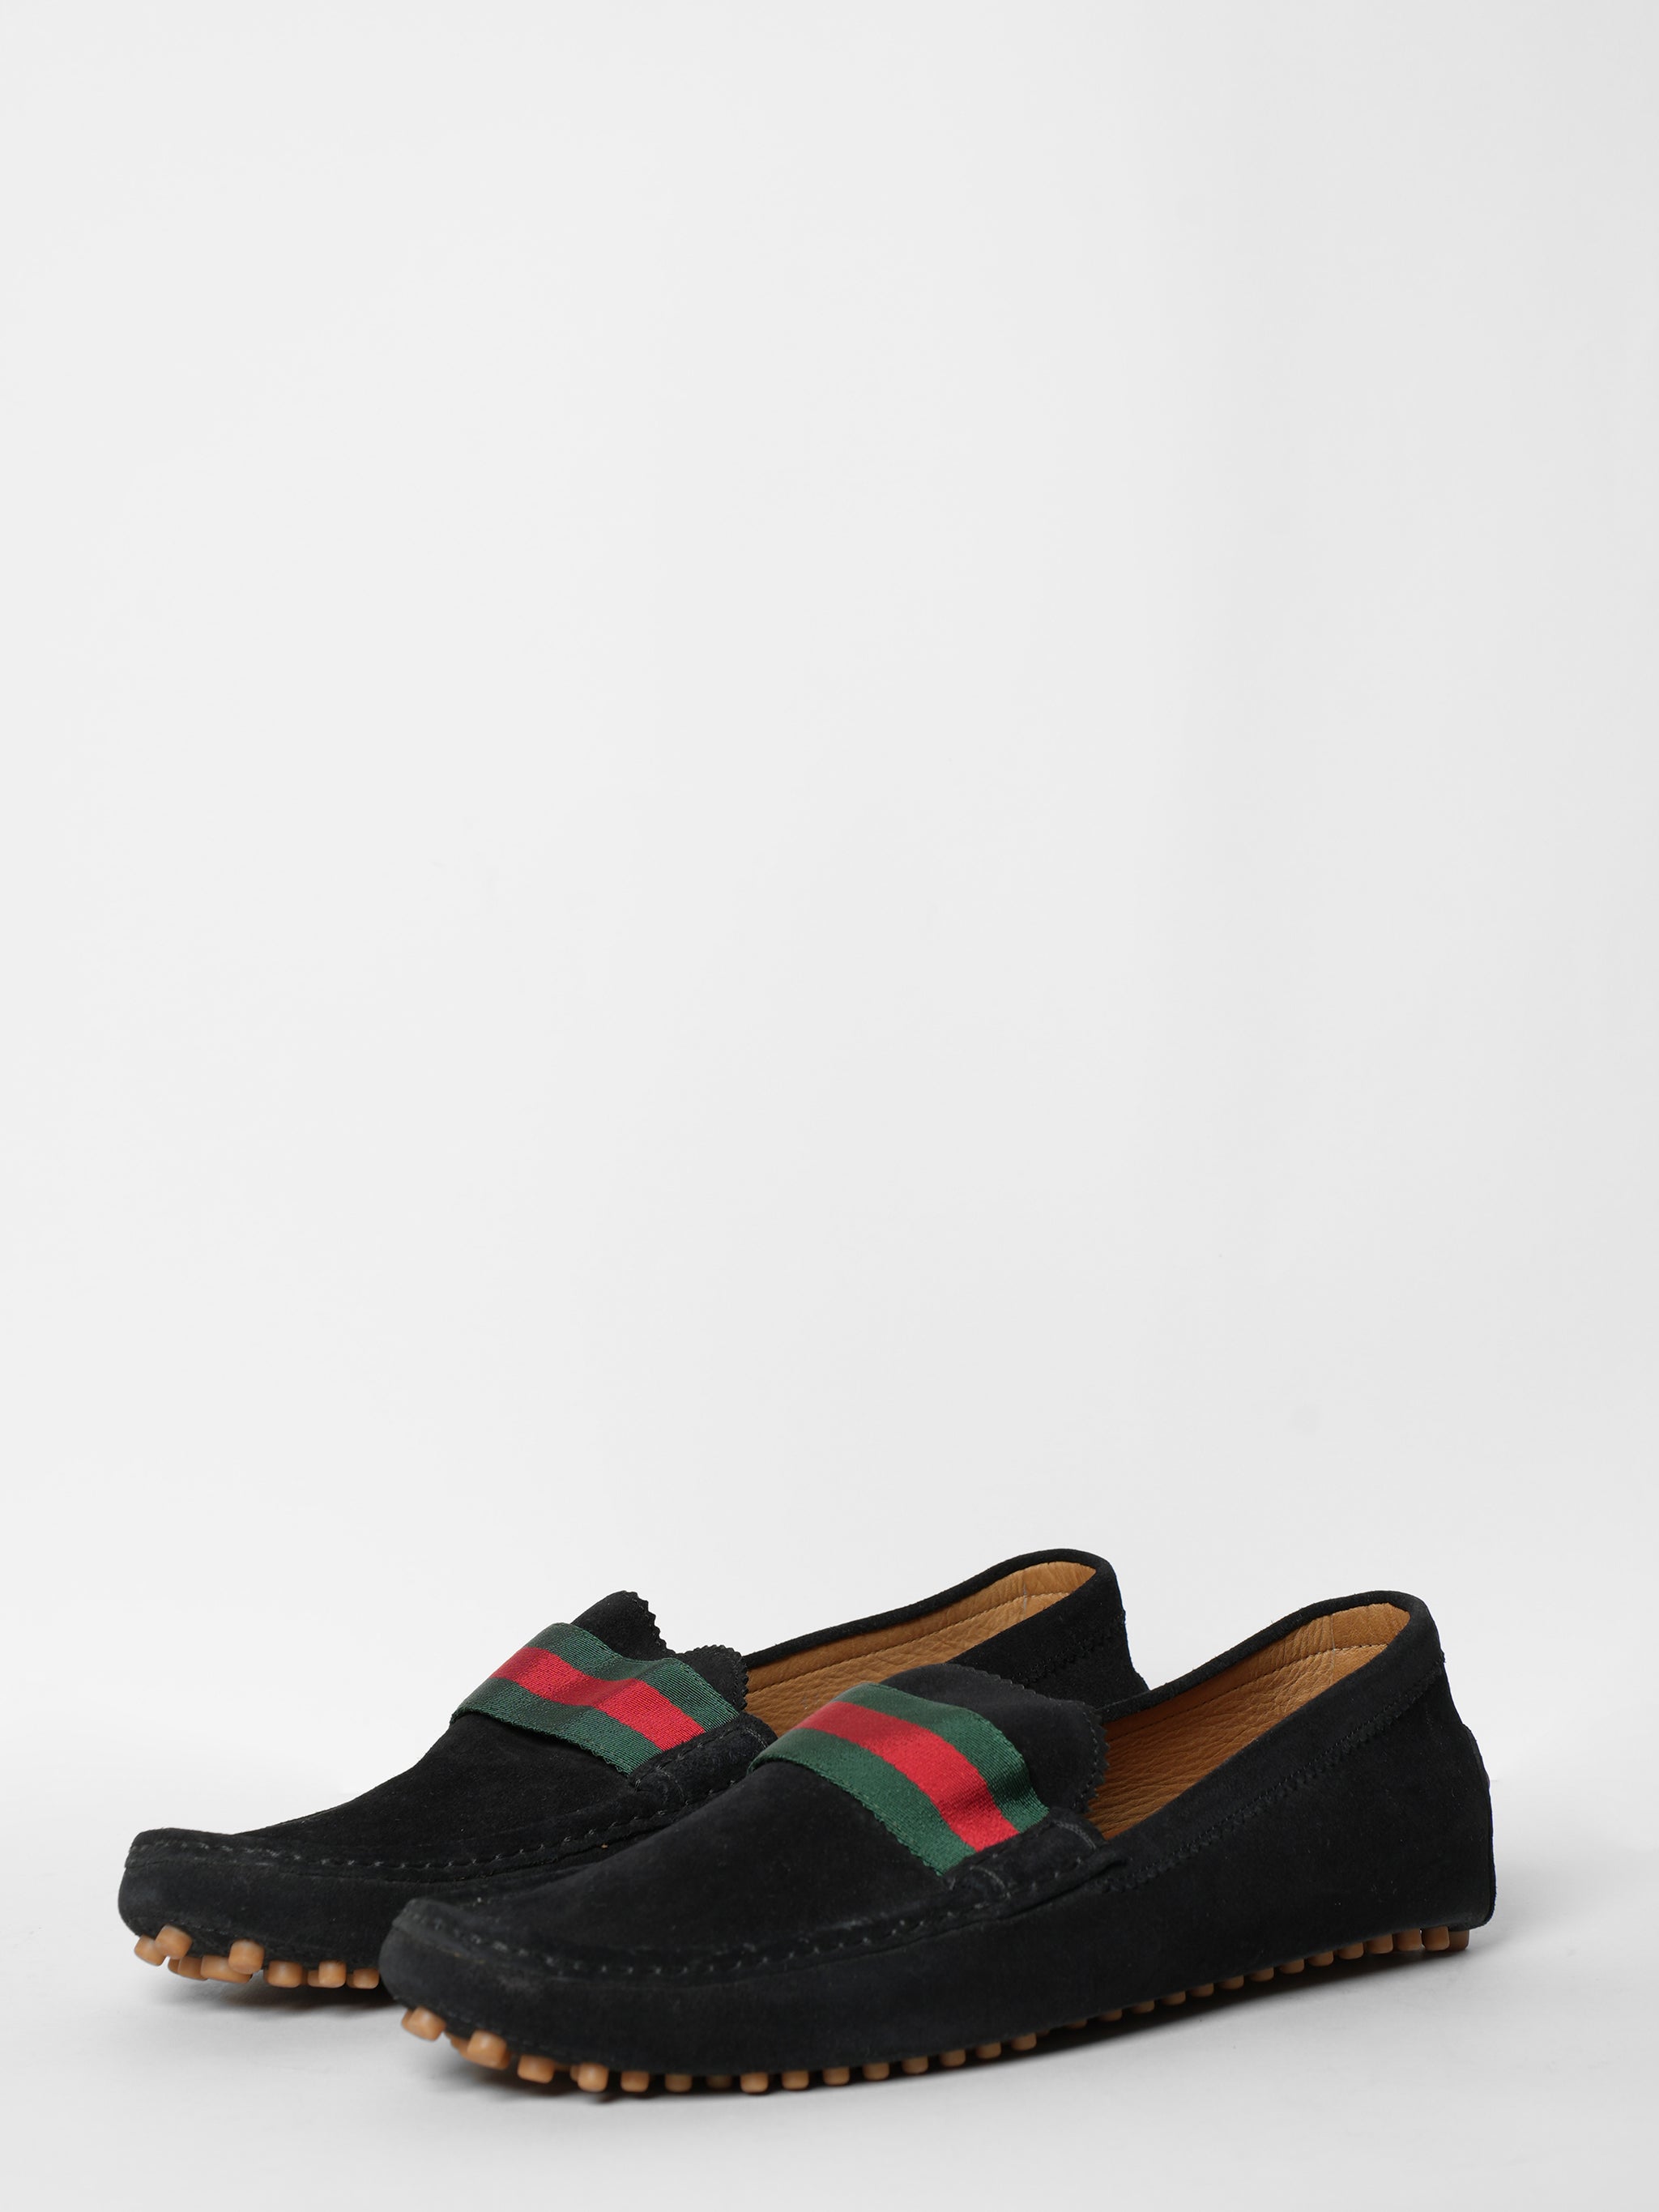 New Gucci Black Suede Shoes